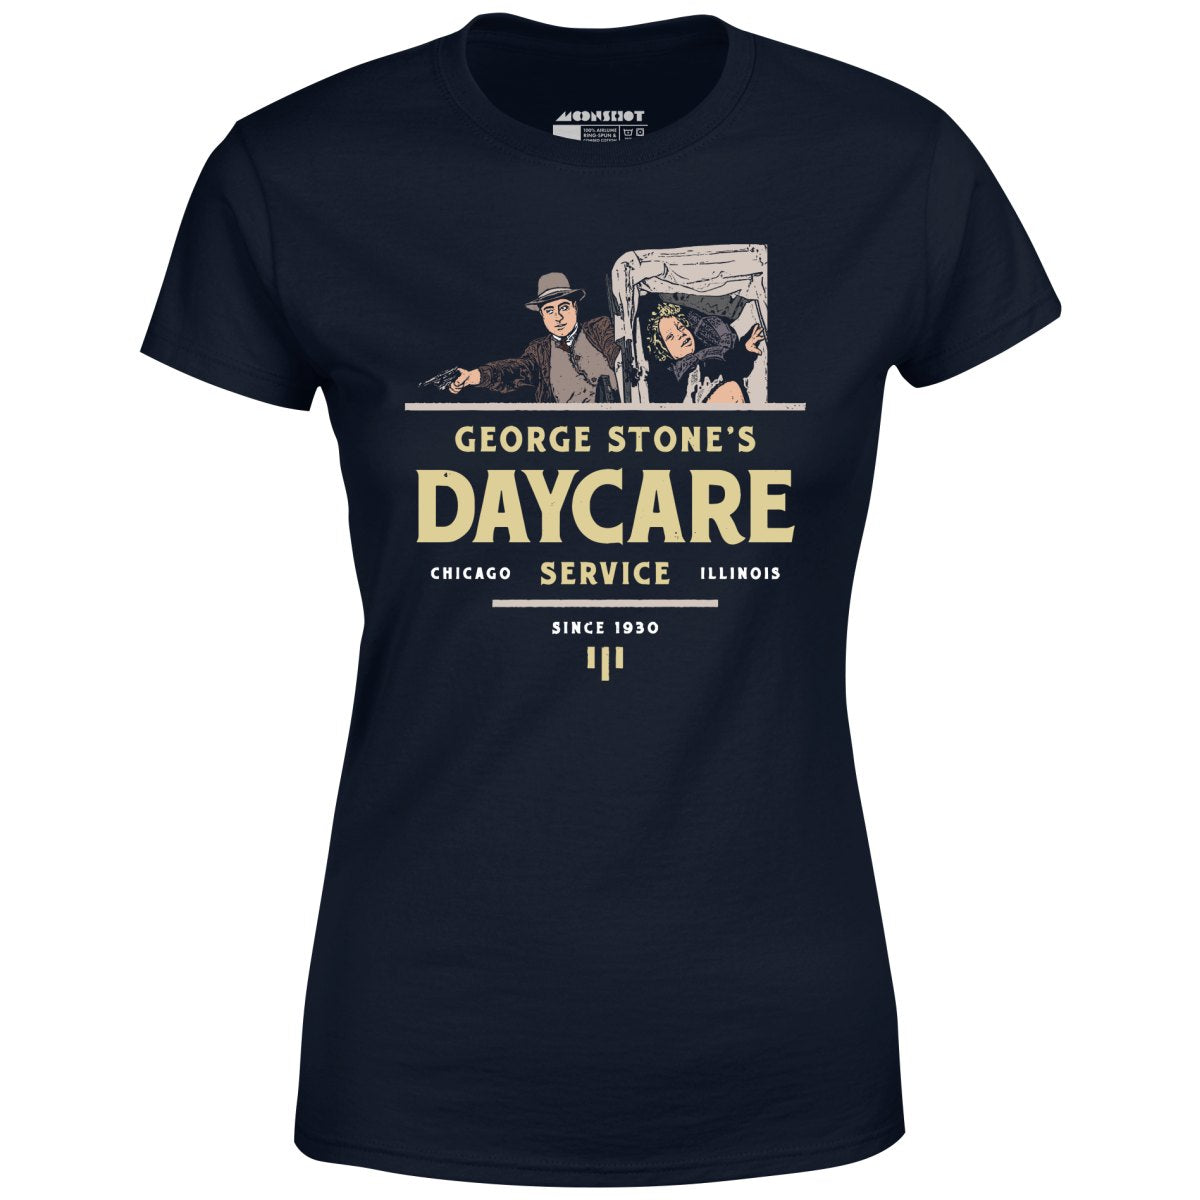 George Stone's Daycare Service - Women's T-Shirt